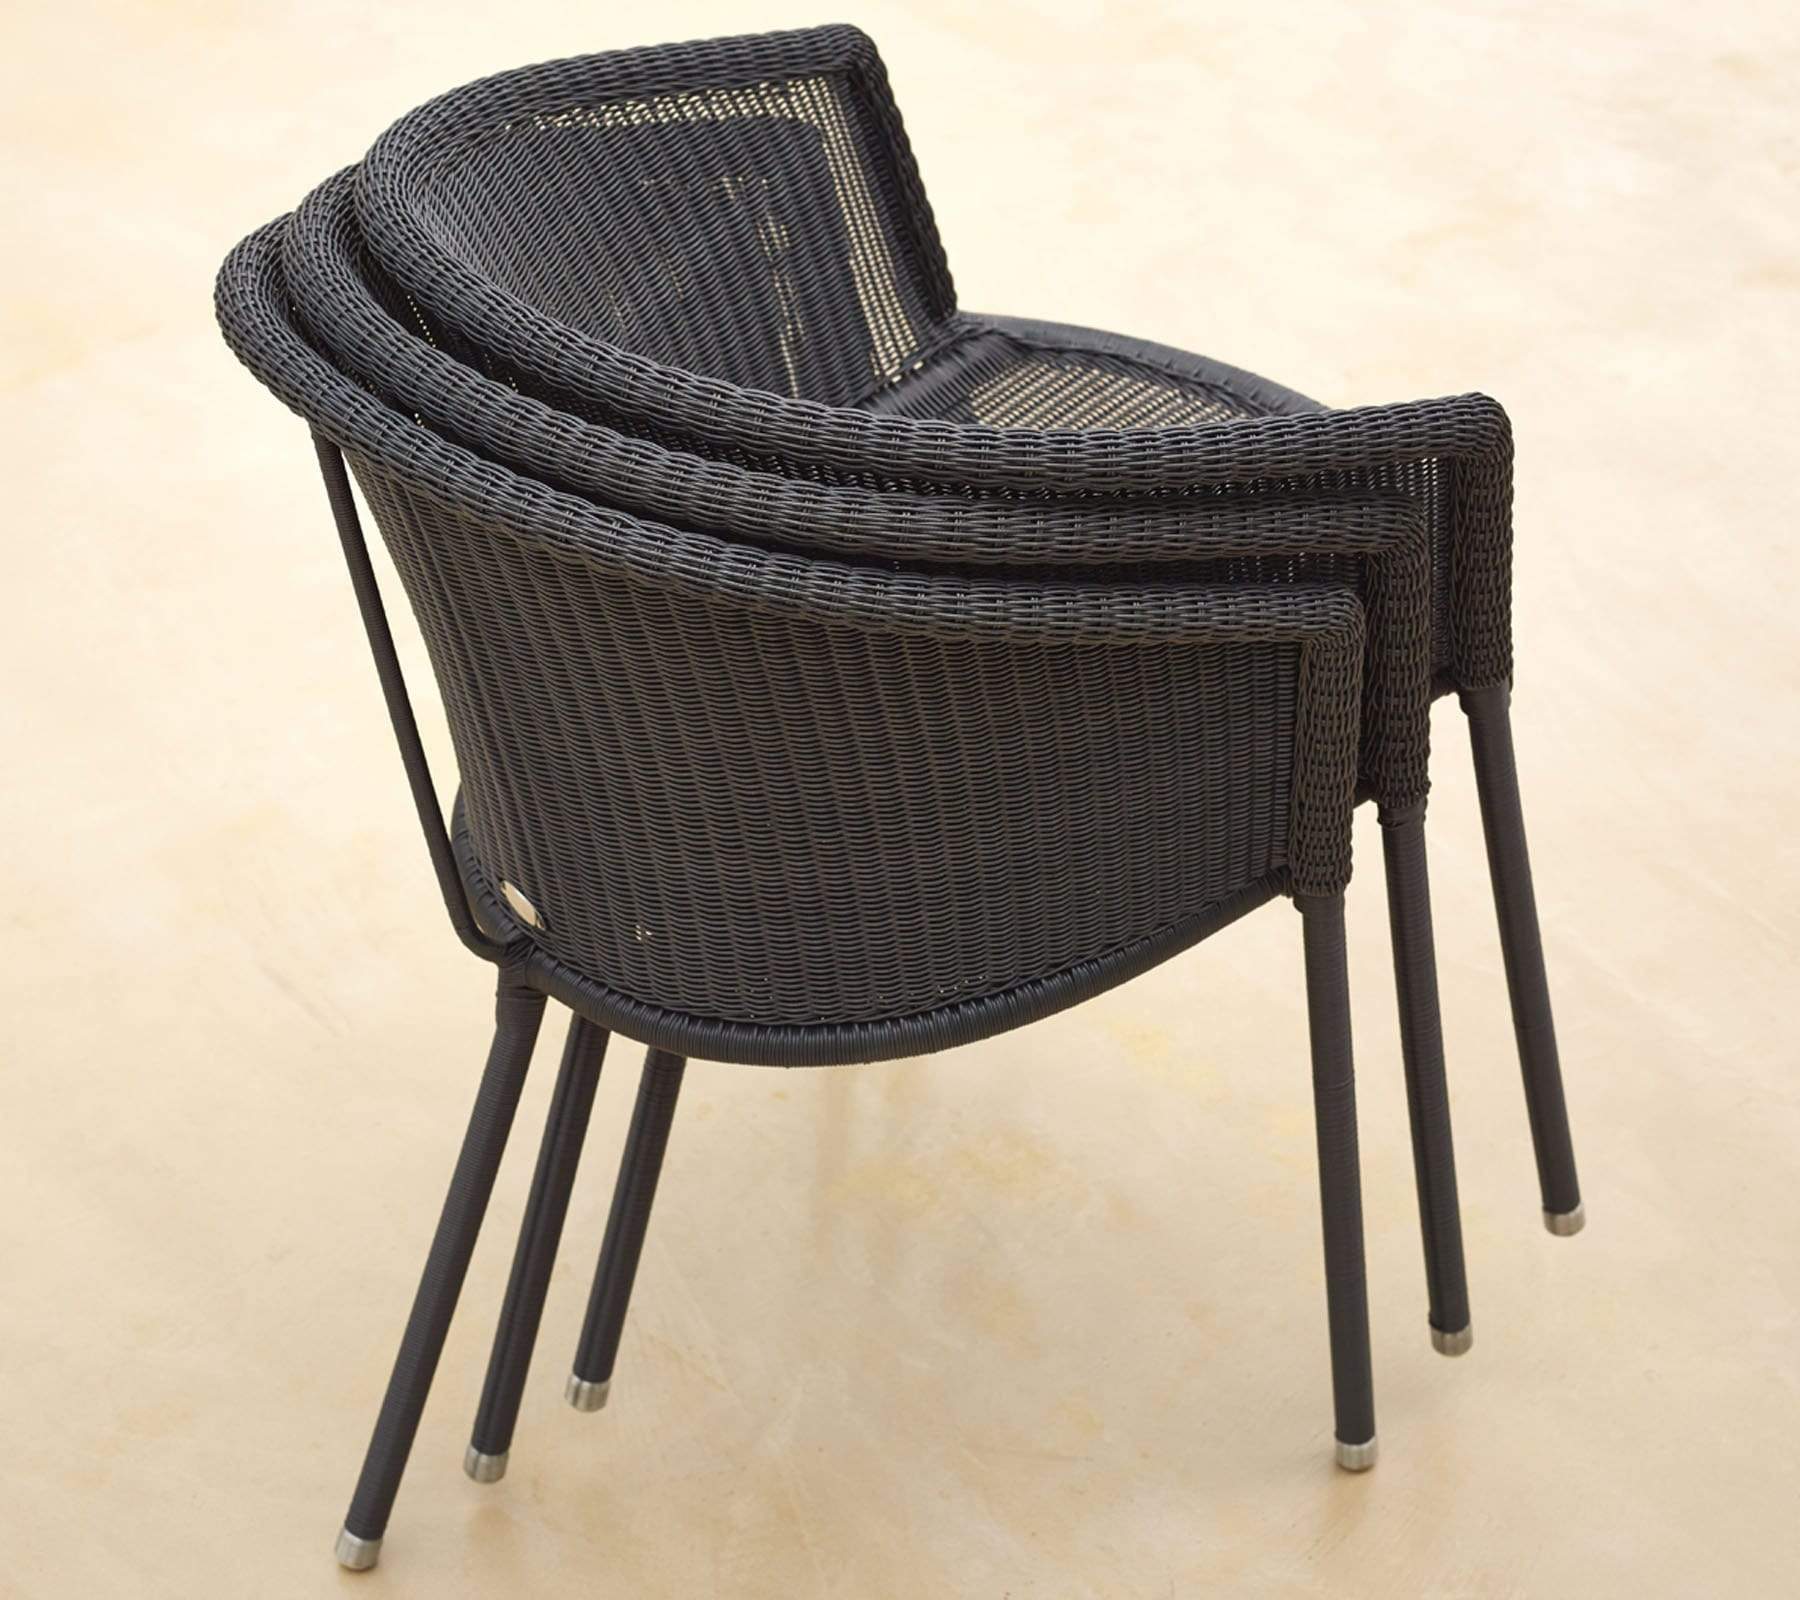  Boxhill's Trinity dark grey outdoor stackable chair piled up